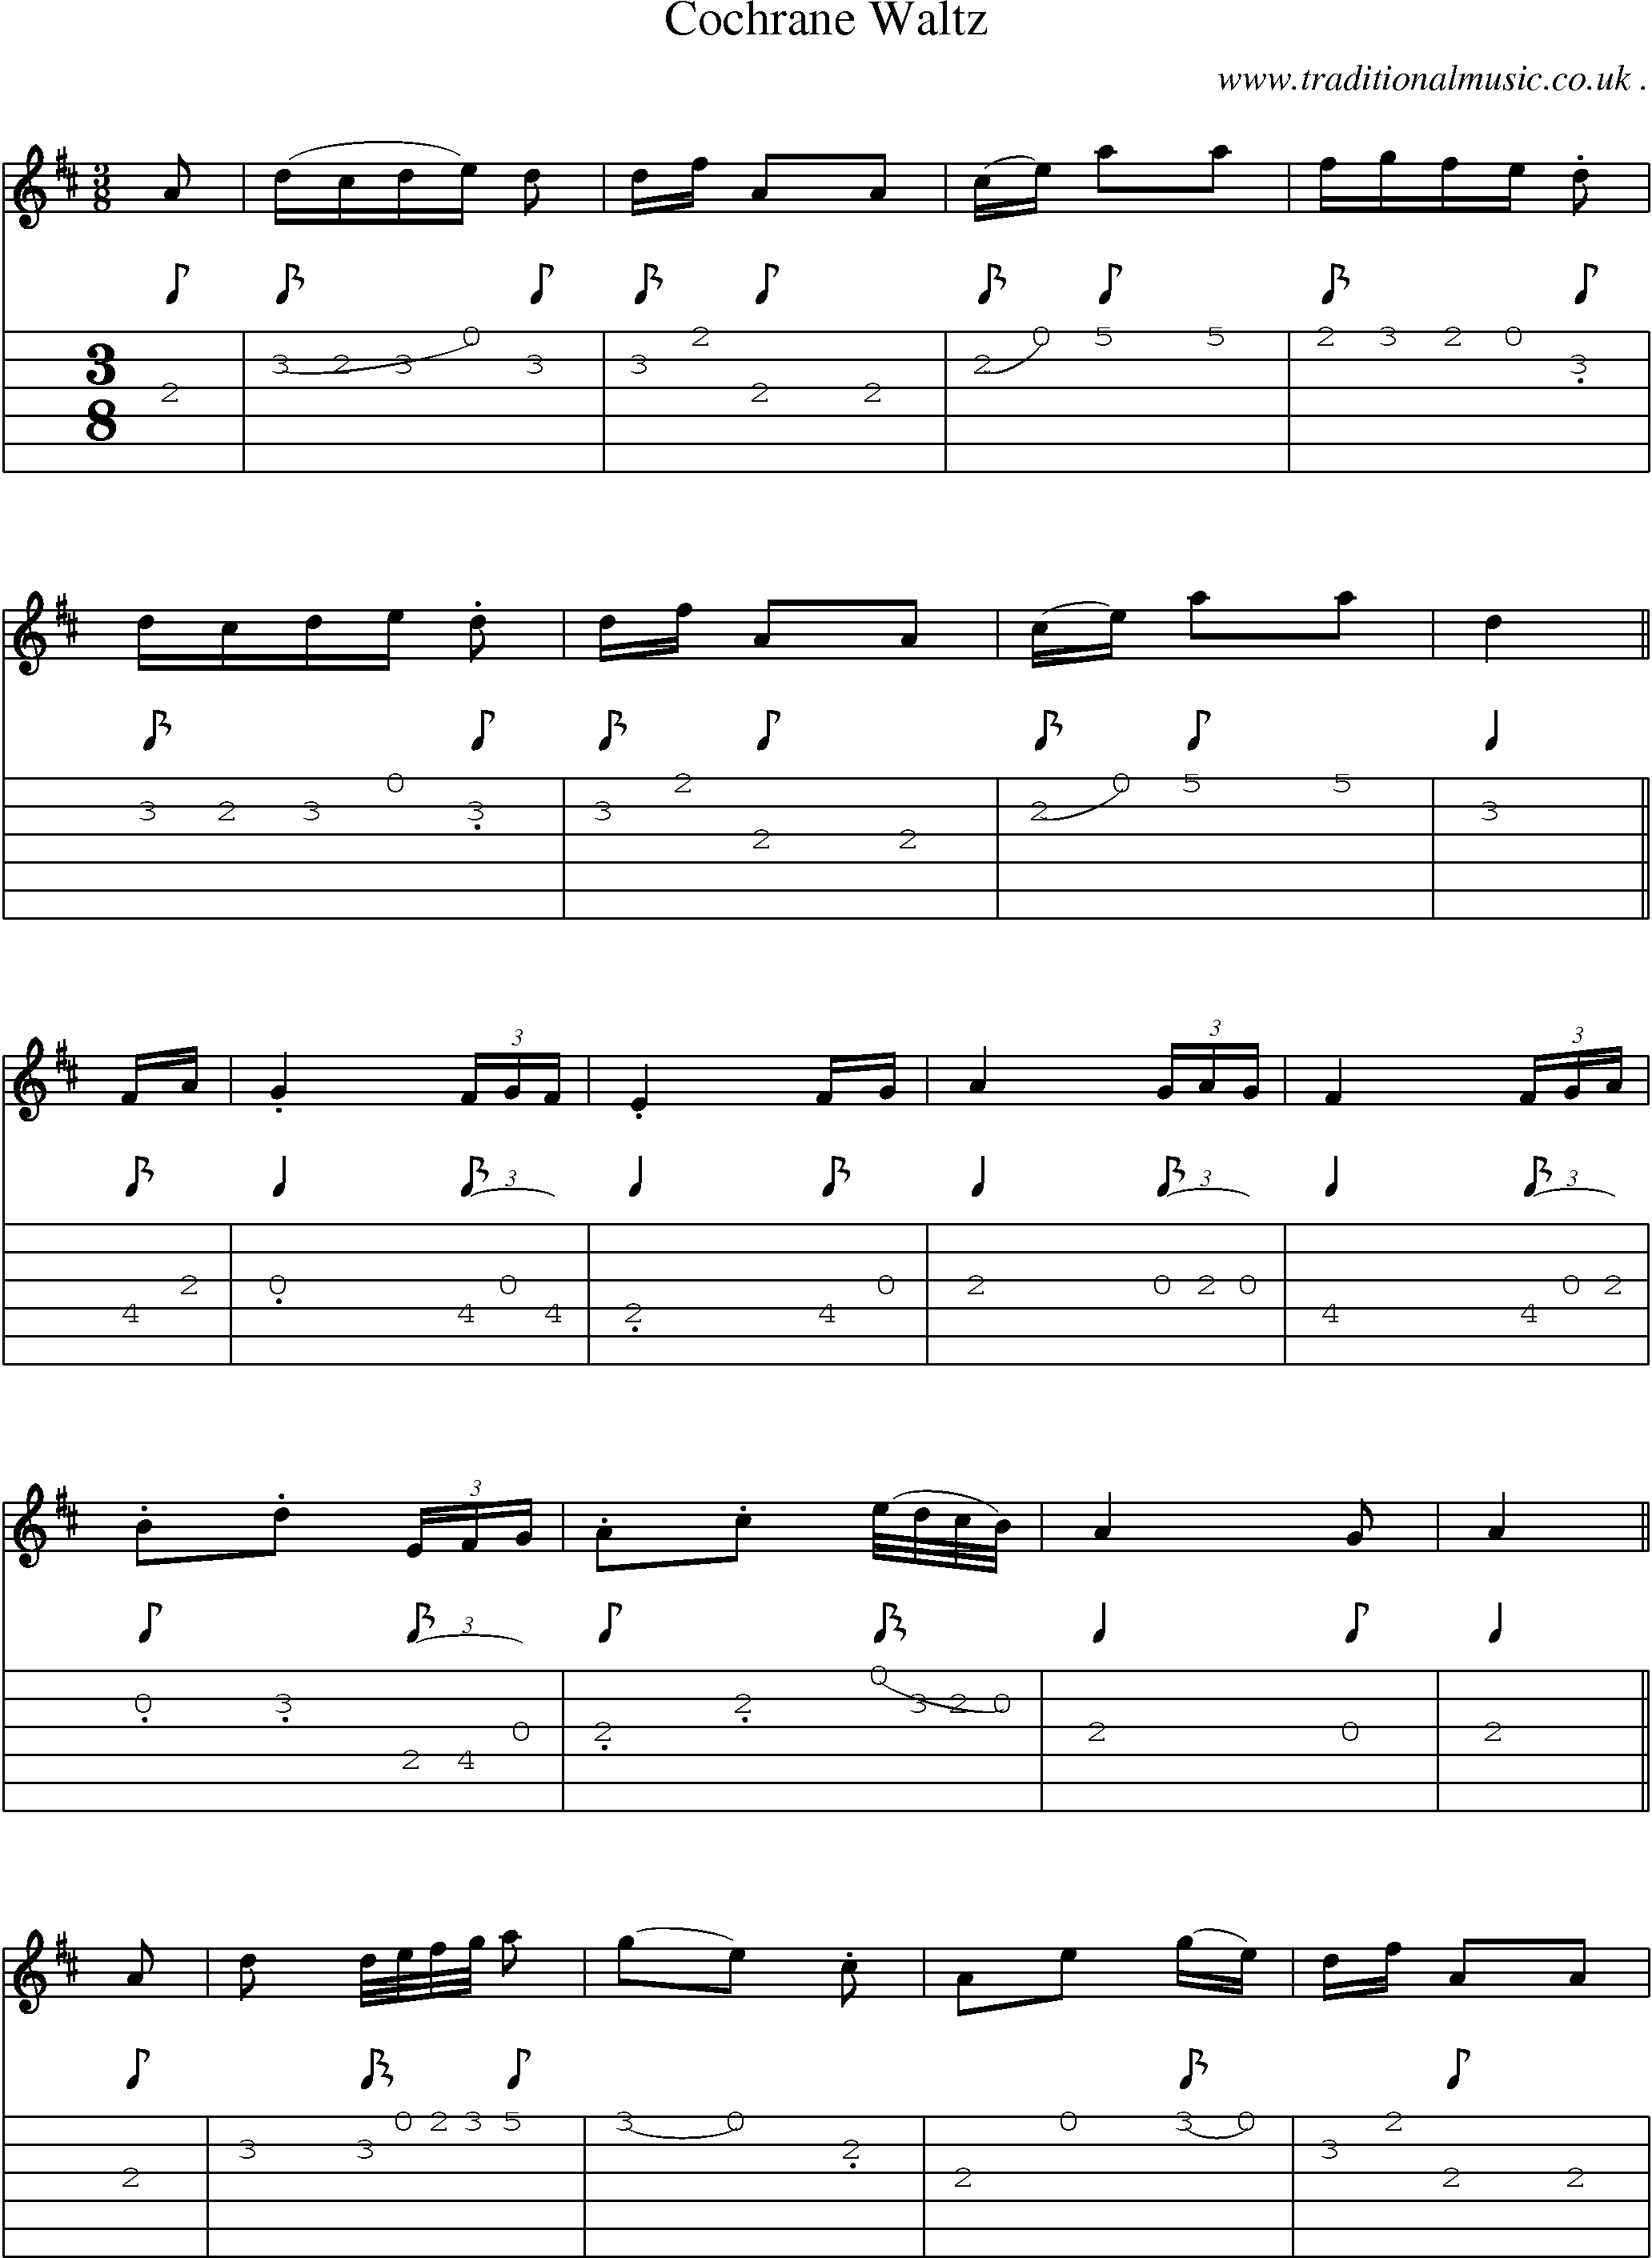 Sheet-Music and Guitar Tabs for Cochrane Waltz